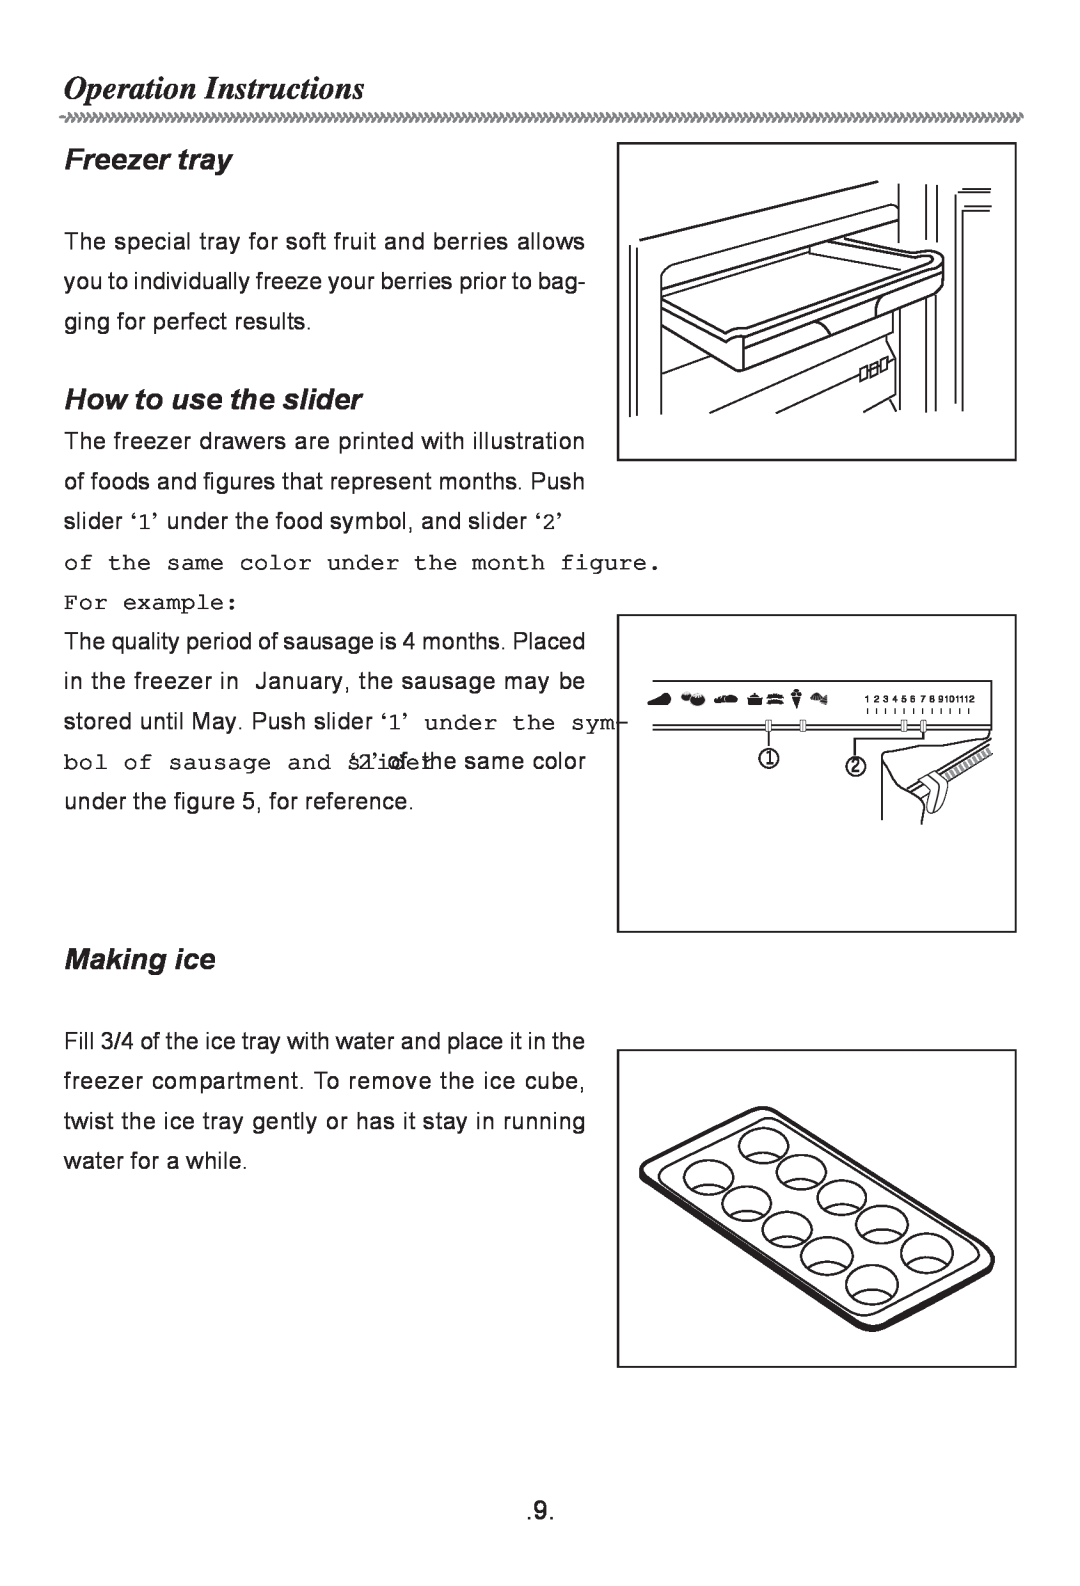 Haier HF-116R owner manual Freezer tray, How to use the slider, Making ice, Operation Instructions, For example 